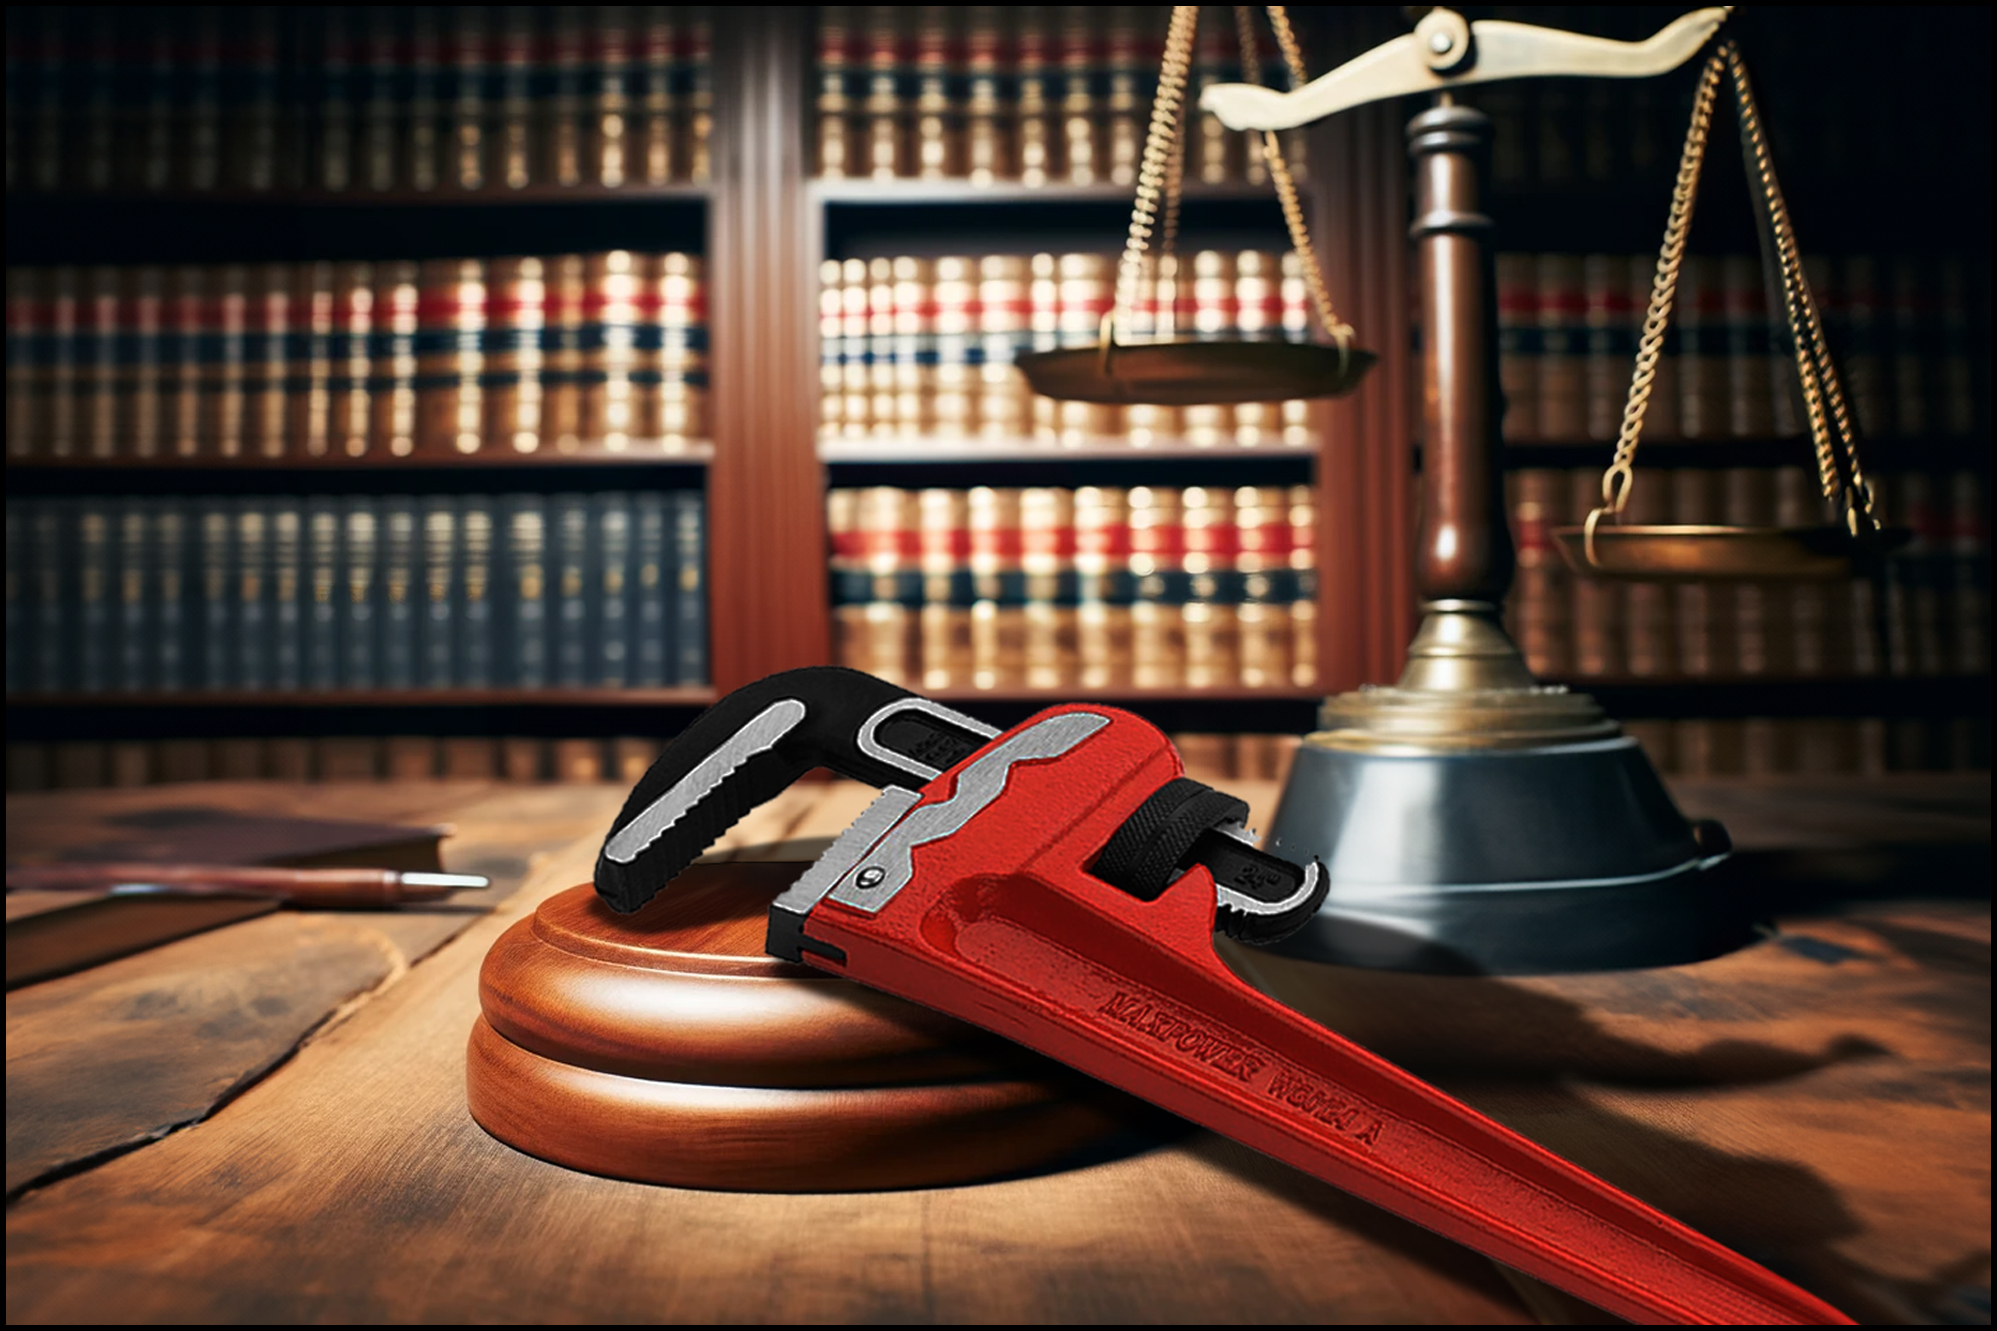 A plumber's wrench instead of a gavel.